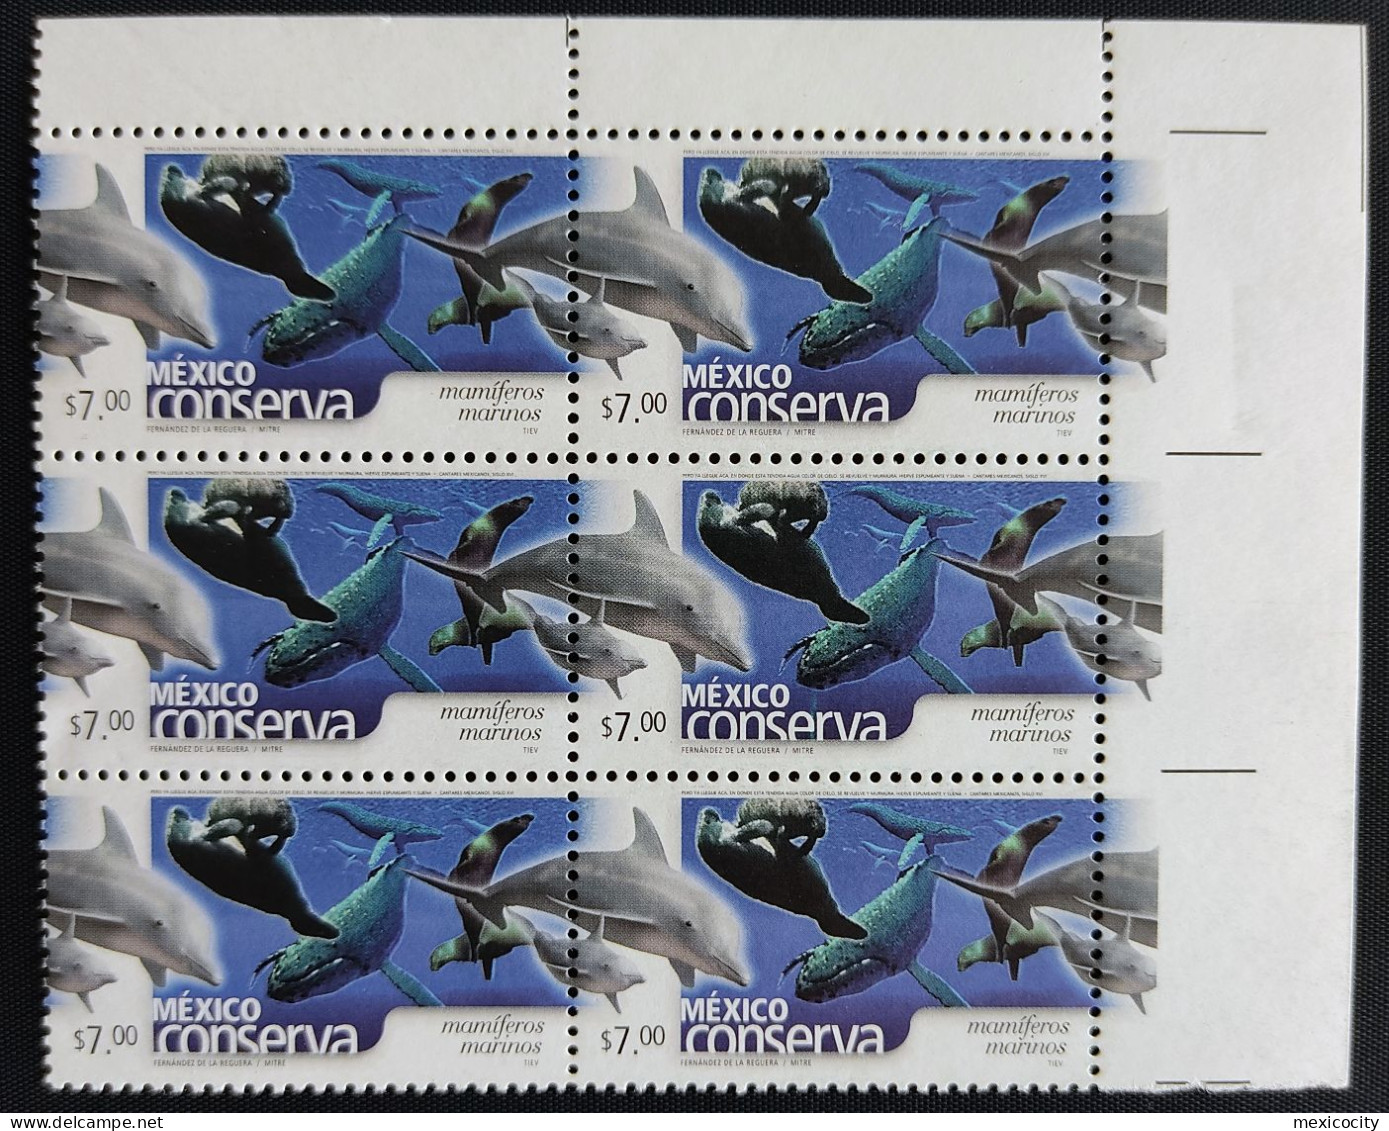 MEXICO 2005 $7 SEA MAMMALS Blk. 6, One With Blue Line Below Whale Flaw, Rare Ptg. Var. MNH Unm. - Mexiko